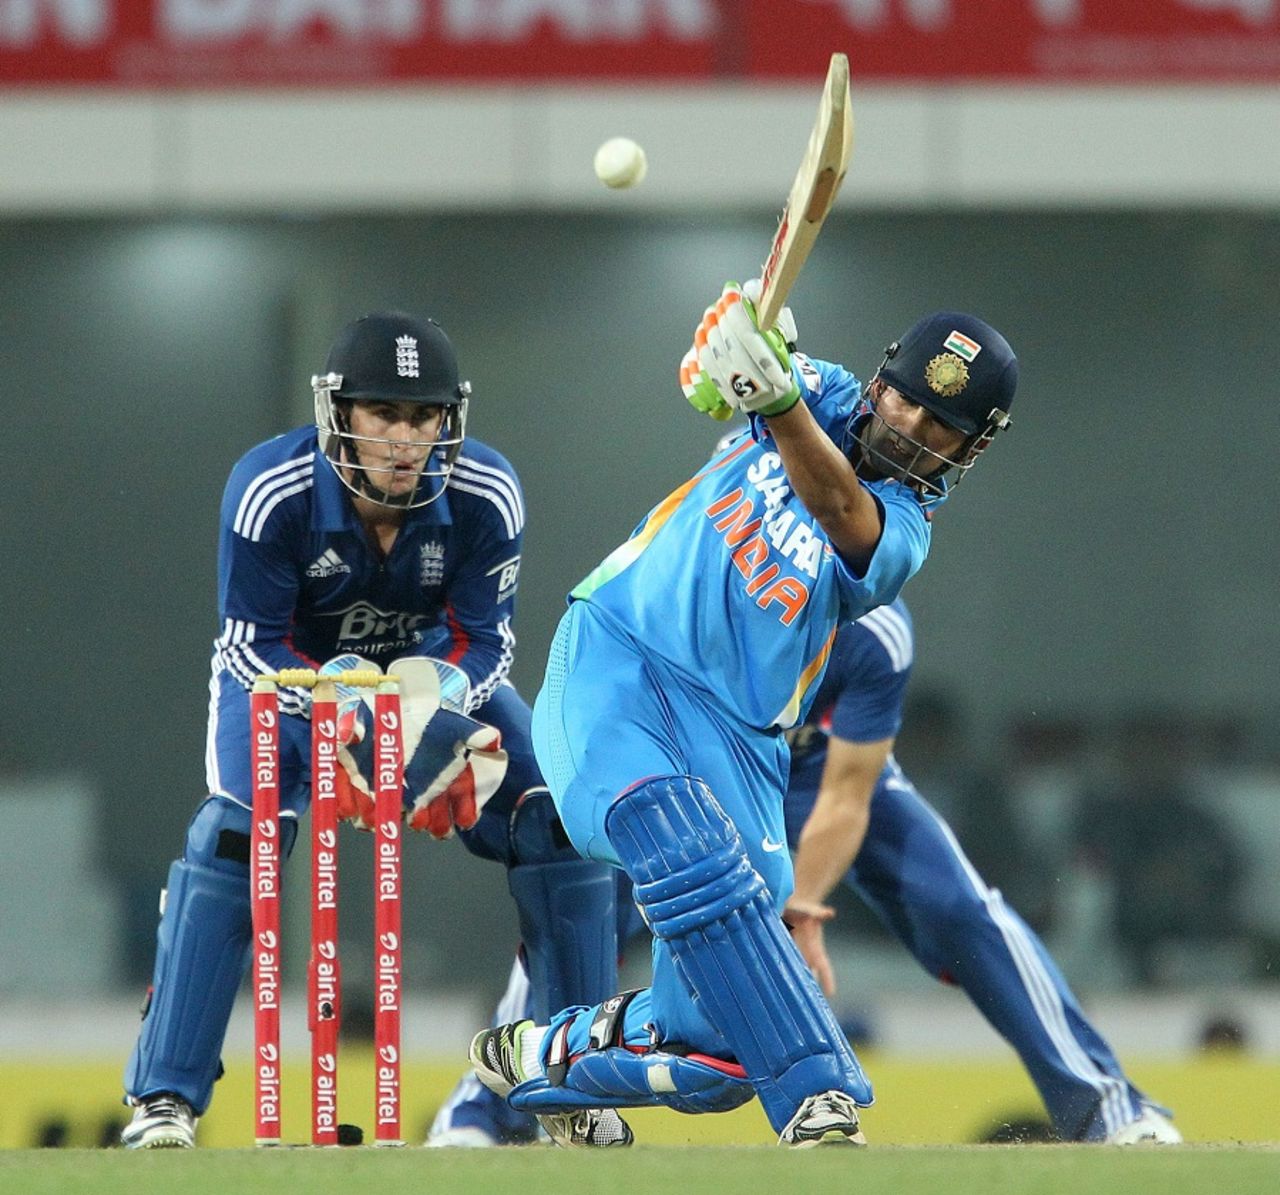 Gautam Gambhir lofted one to mid-on to end his knock of 33, India v England, 3rd ODI, Ranchi, January 19, 2013